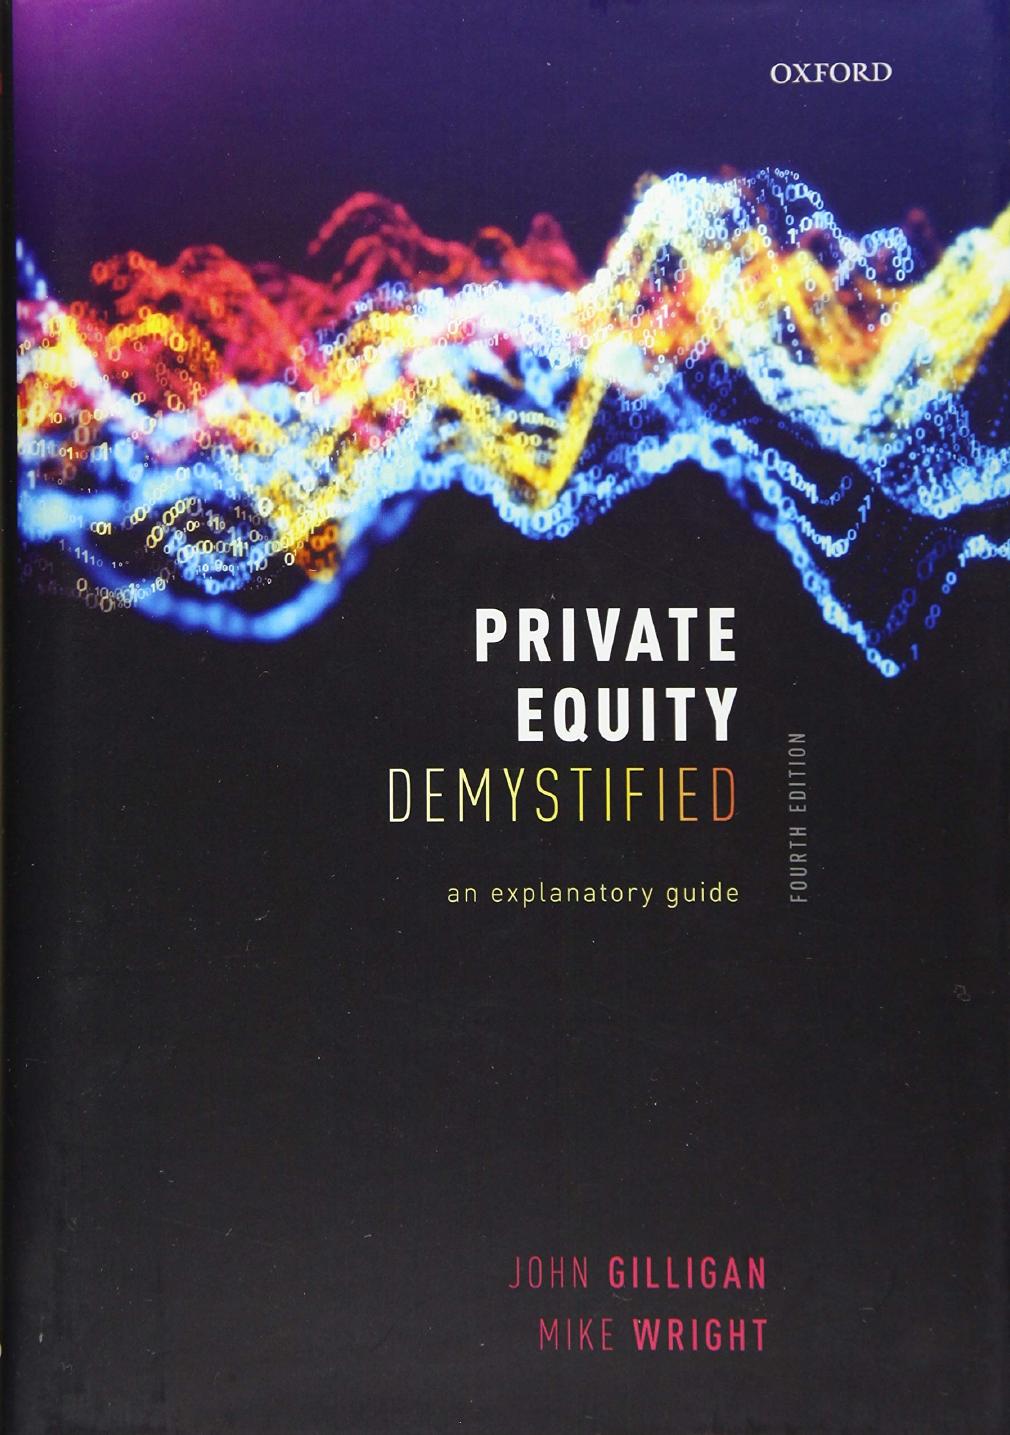 Private Equity Demystified An Explanatory Guide 4th Edition by John Gilligan, Mike Wright 